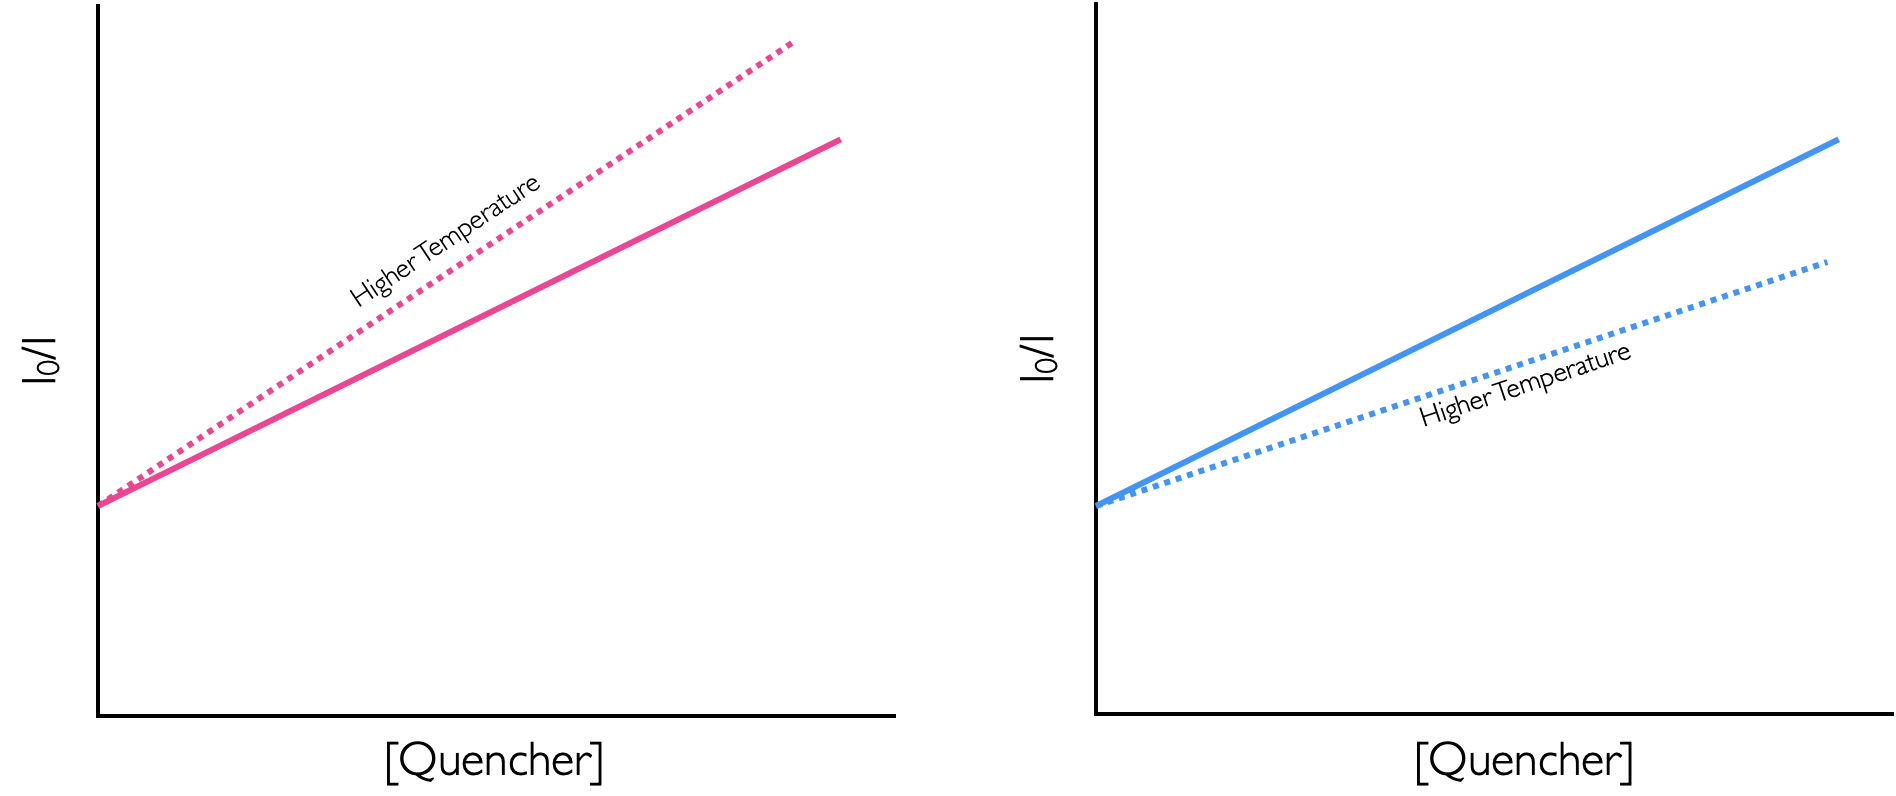 The effect of tempearture on the quenching efficiency of dynamic (pink on the left) and static (green on the right) quenching